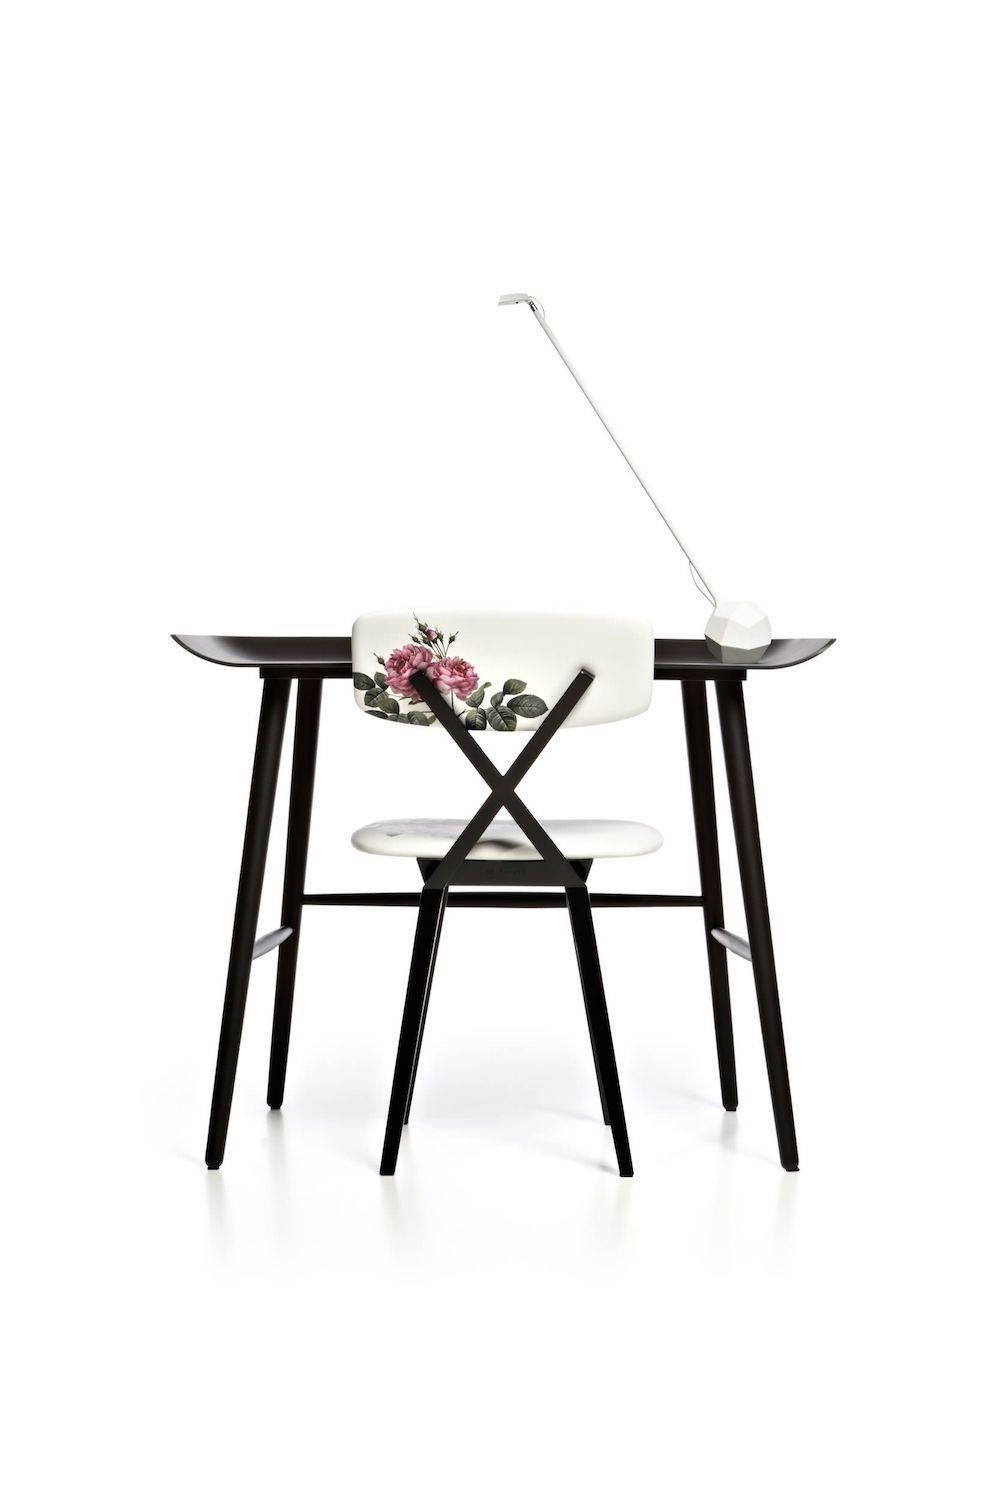 Moooi Woood secretary desk by Marcel Wanders in black stained oak.

A personal desk, a private home office, a sided side table, a fruit bowl for your apples. 

Top features a 50 mm plug hole for your charger. A discreet outlet for cable